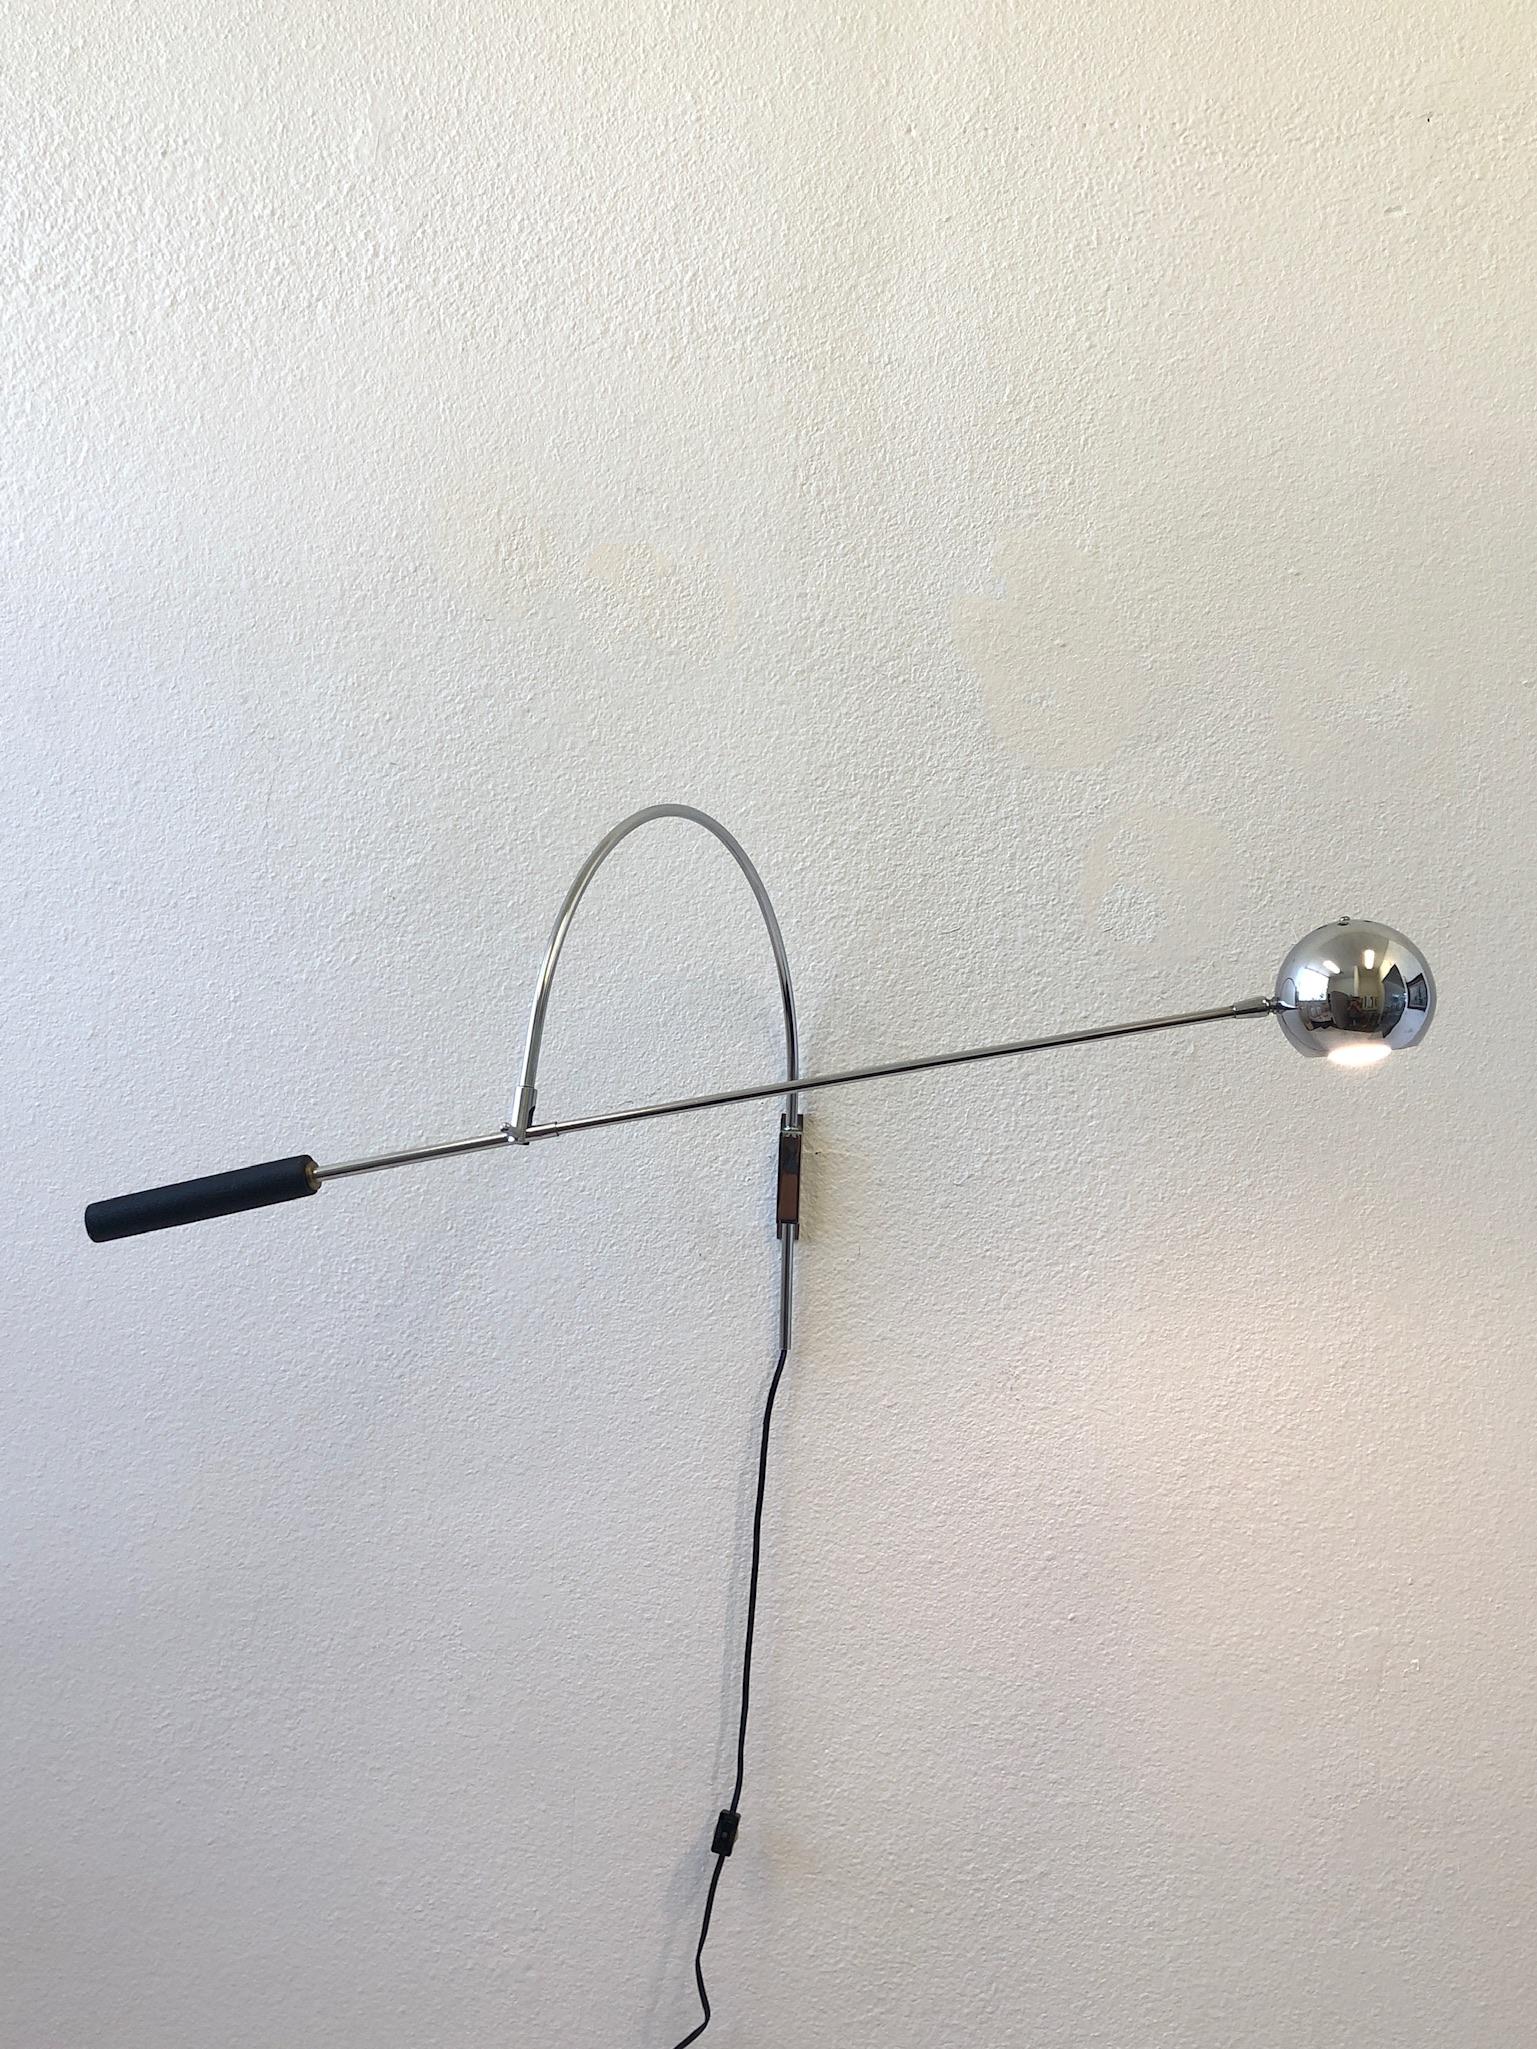 1970’s adjustable polish chrome ‘Orbiter’ wall lamp by Robert Sonneman.
The lamp has an on/off in line switch and takes a small GE 120v 40w max lightbulb.
Measurements:
18” deep from wall.
18” high of arch.
33.5” adjustable arm length.